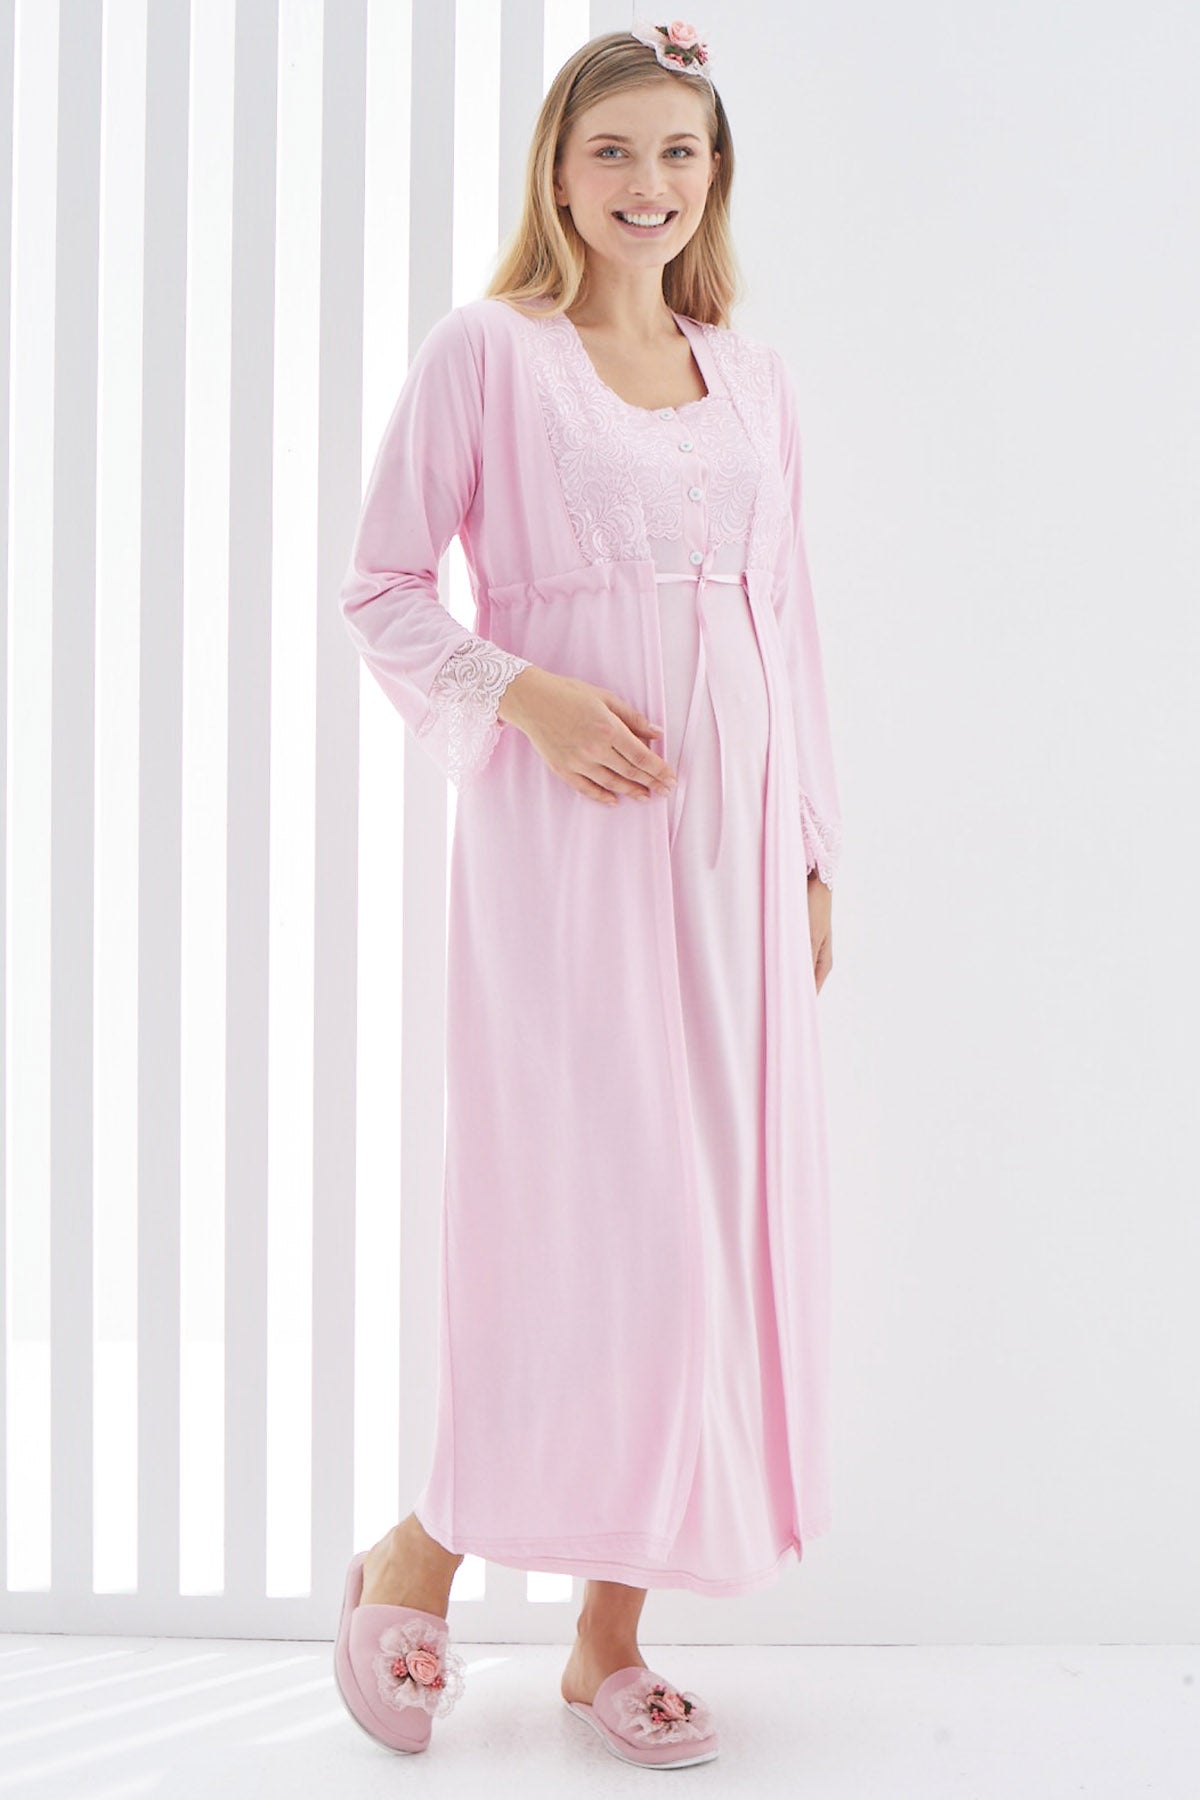 Shopymommy 2267 Maternity & Nursing Nightgown With Lace Sleeve Robe Pink